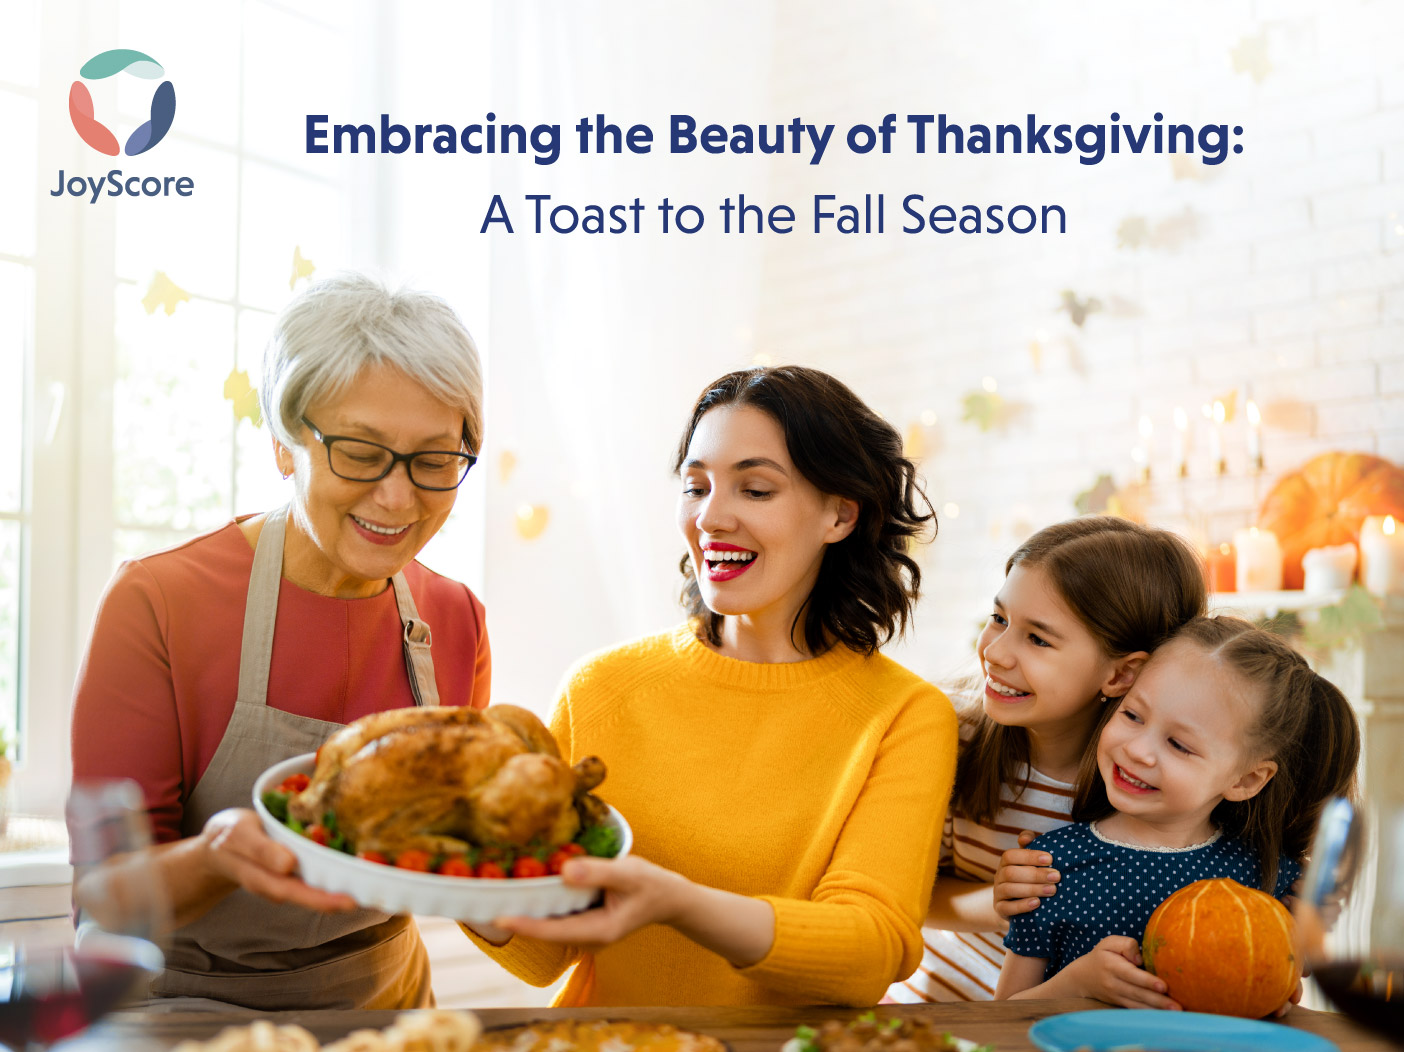 Embracing the Beauty of Thanksgiving: A Toast to the Fall Season